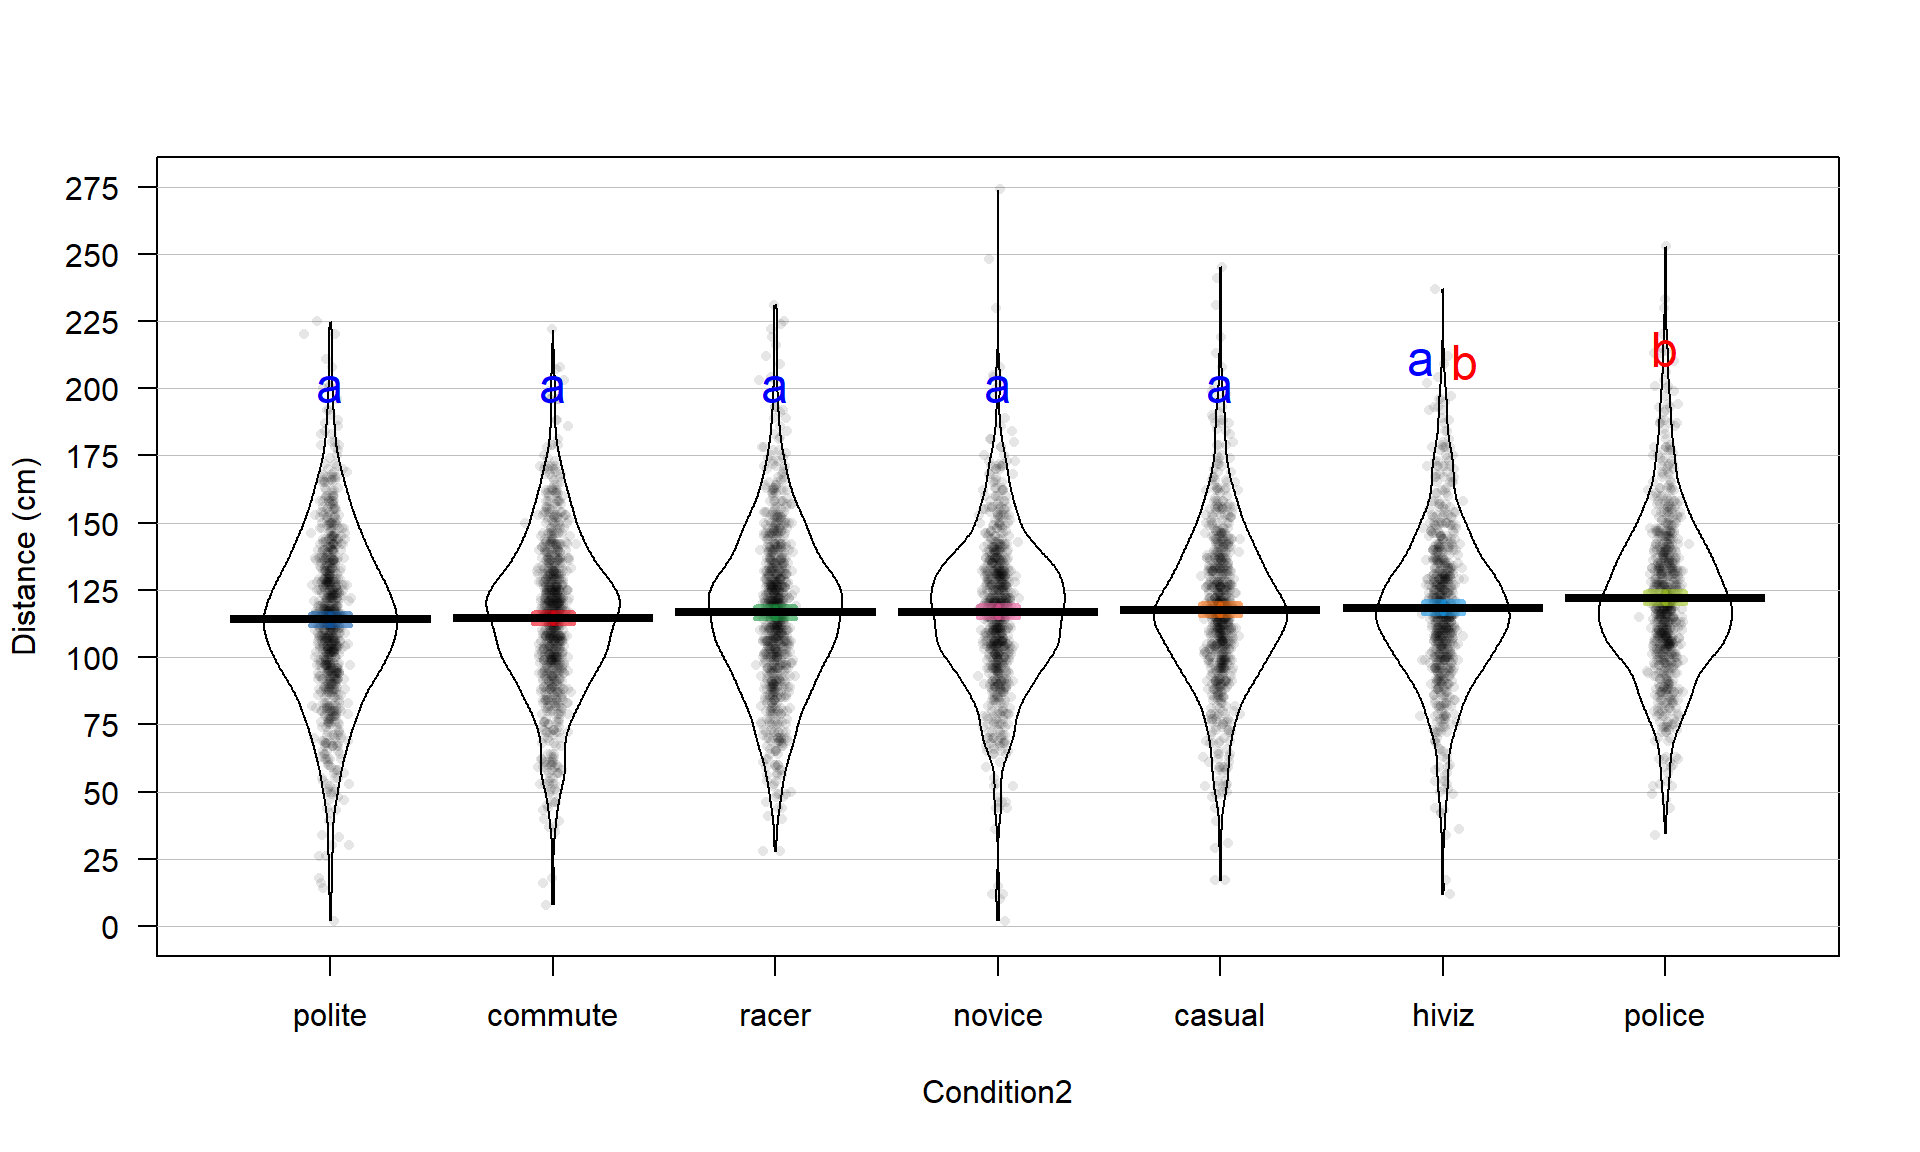 Pirate-plot of overtake distances by group, sorted by sample means with Tukey’s HSD CLD displayed.